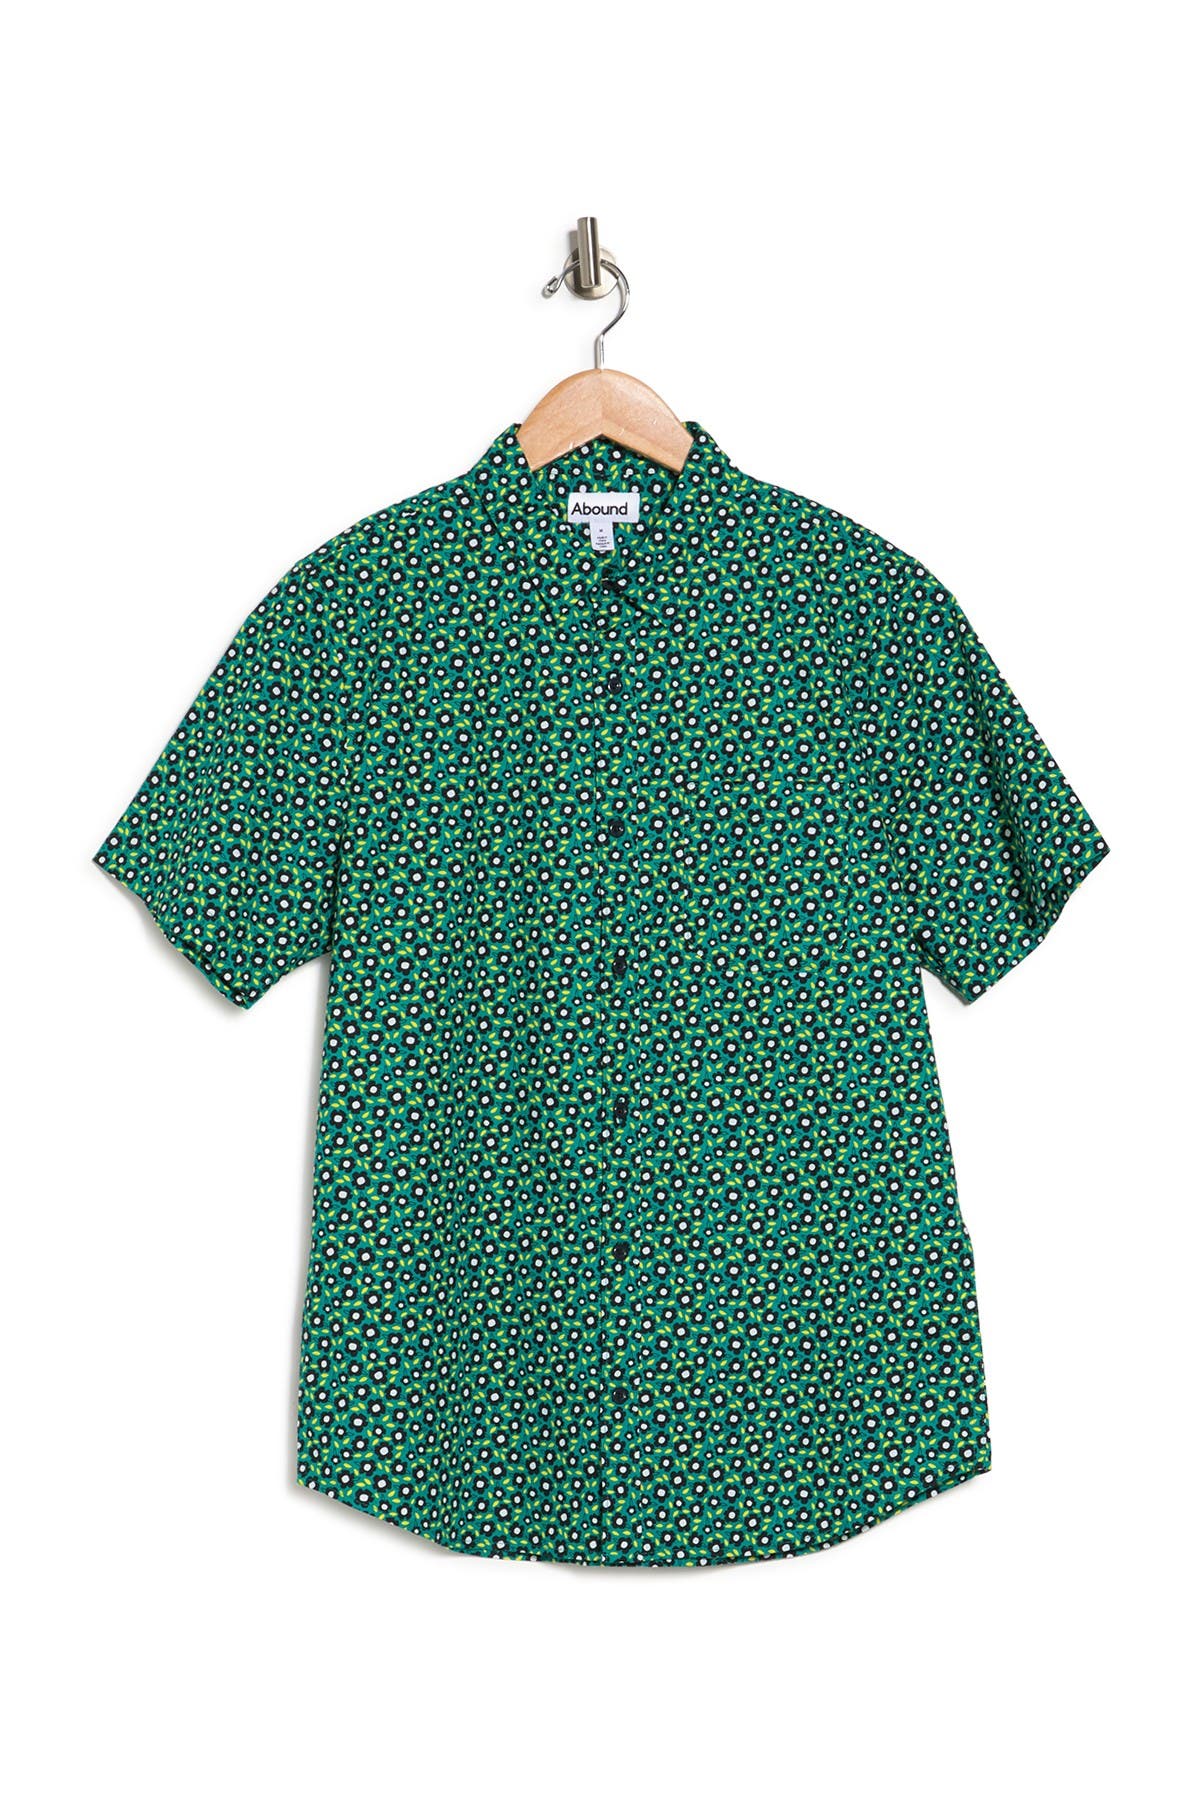 Abound Mini Print Regular Fit Shirt In Teal Compass Graphic Floral